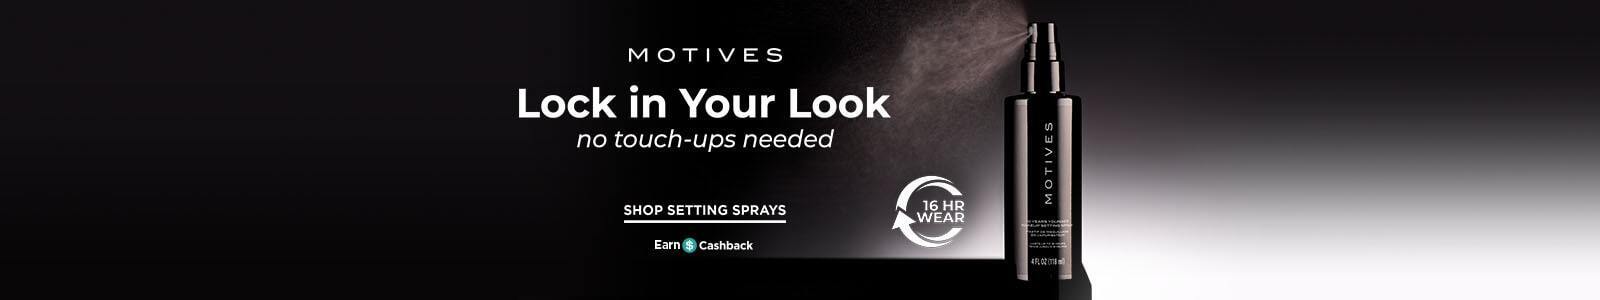 Motives Lock in Your Look no touch-ups needed Shop Setting Sprays 16 hour wear